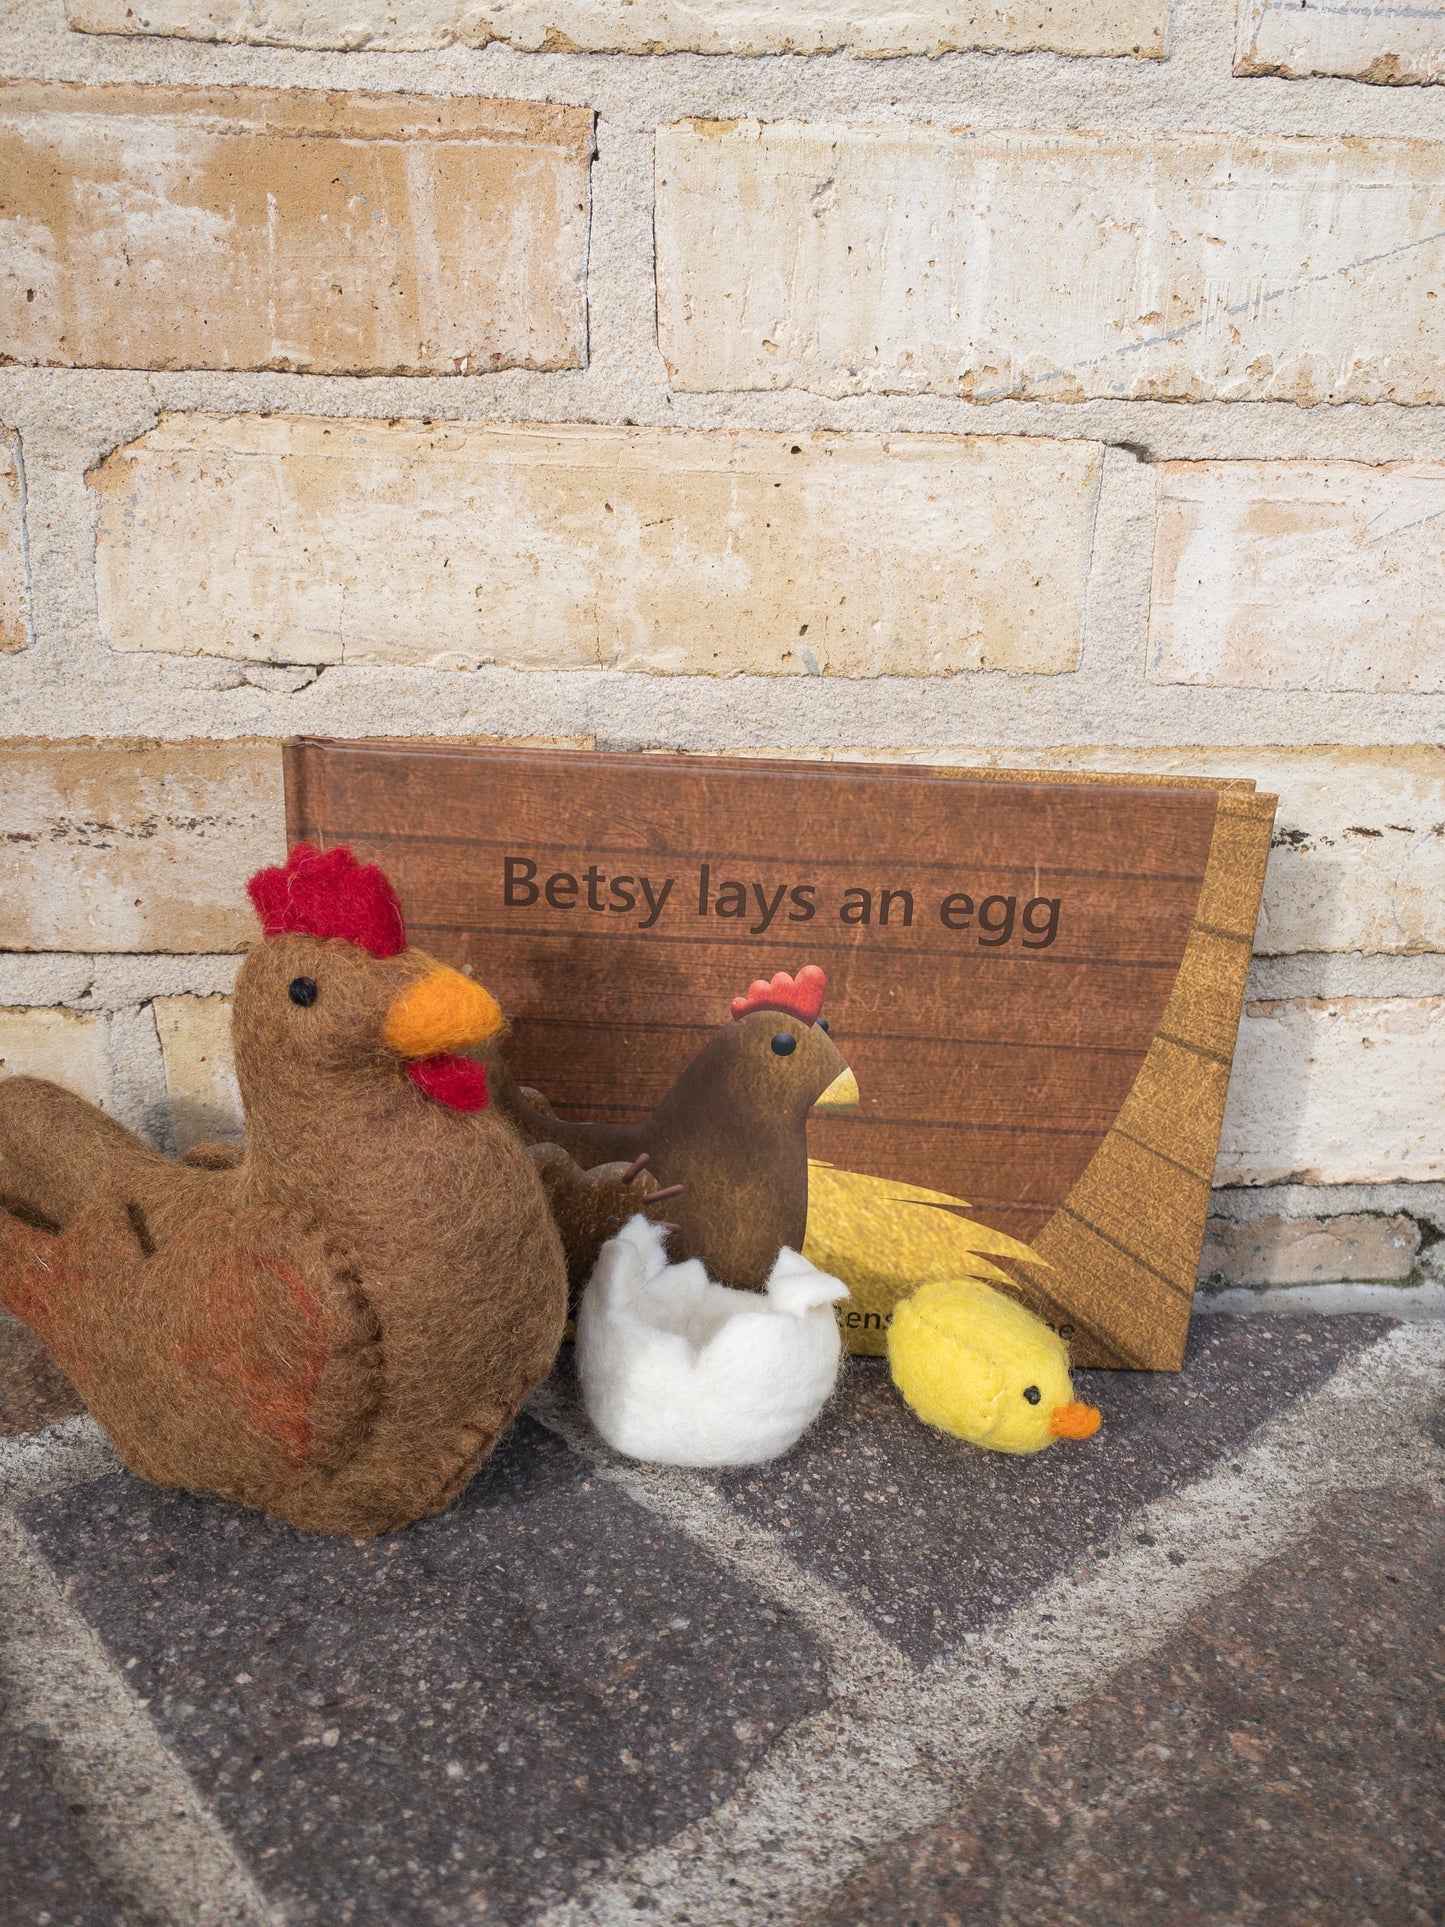 Papoose Toys - Betsy Lays an Egg - Book and Felt Chicken and Egg